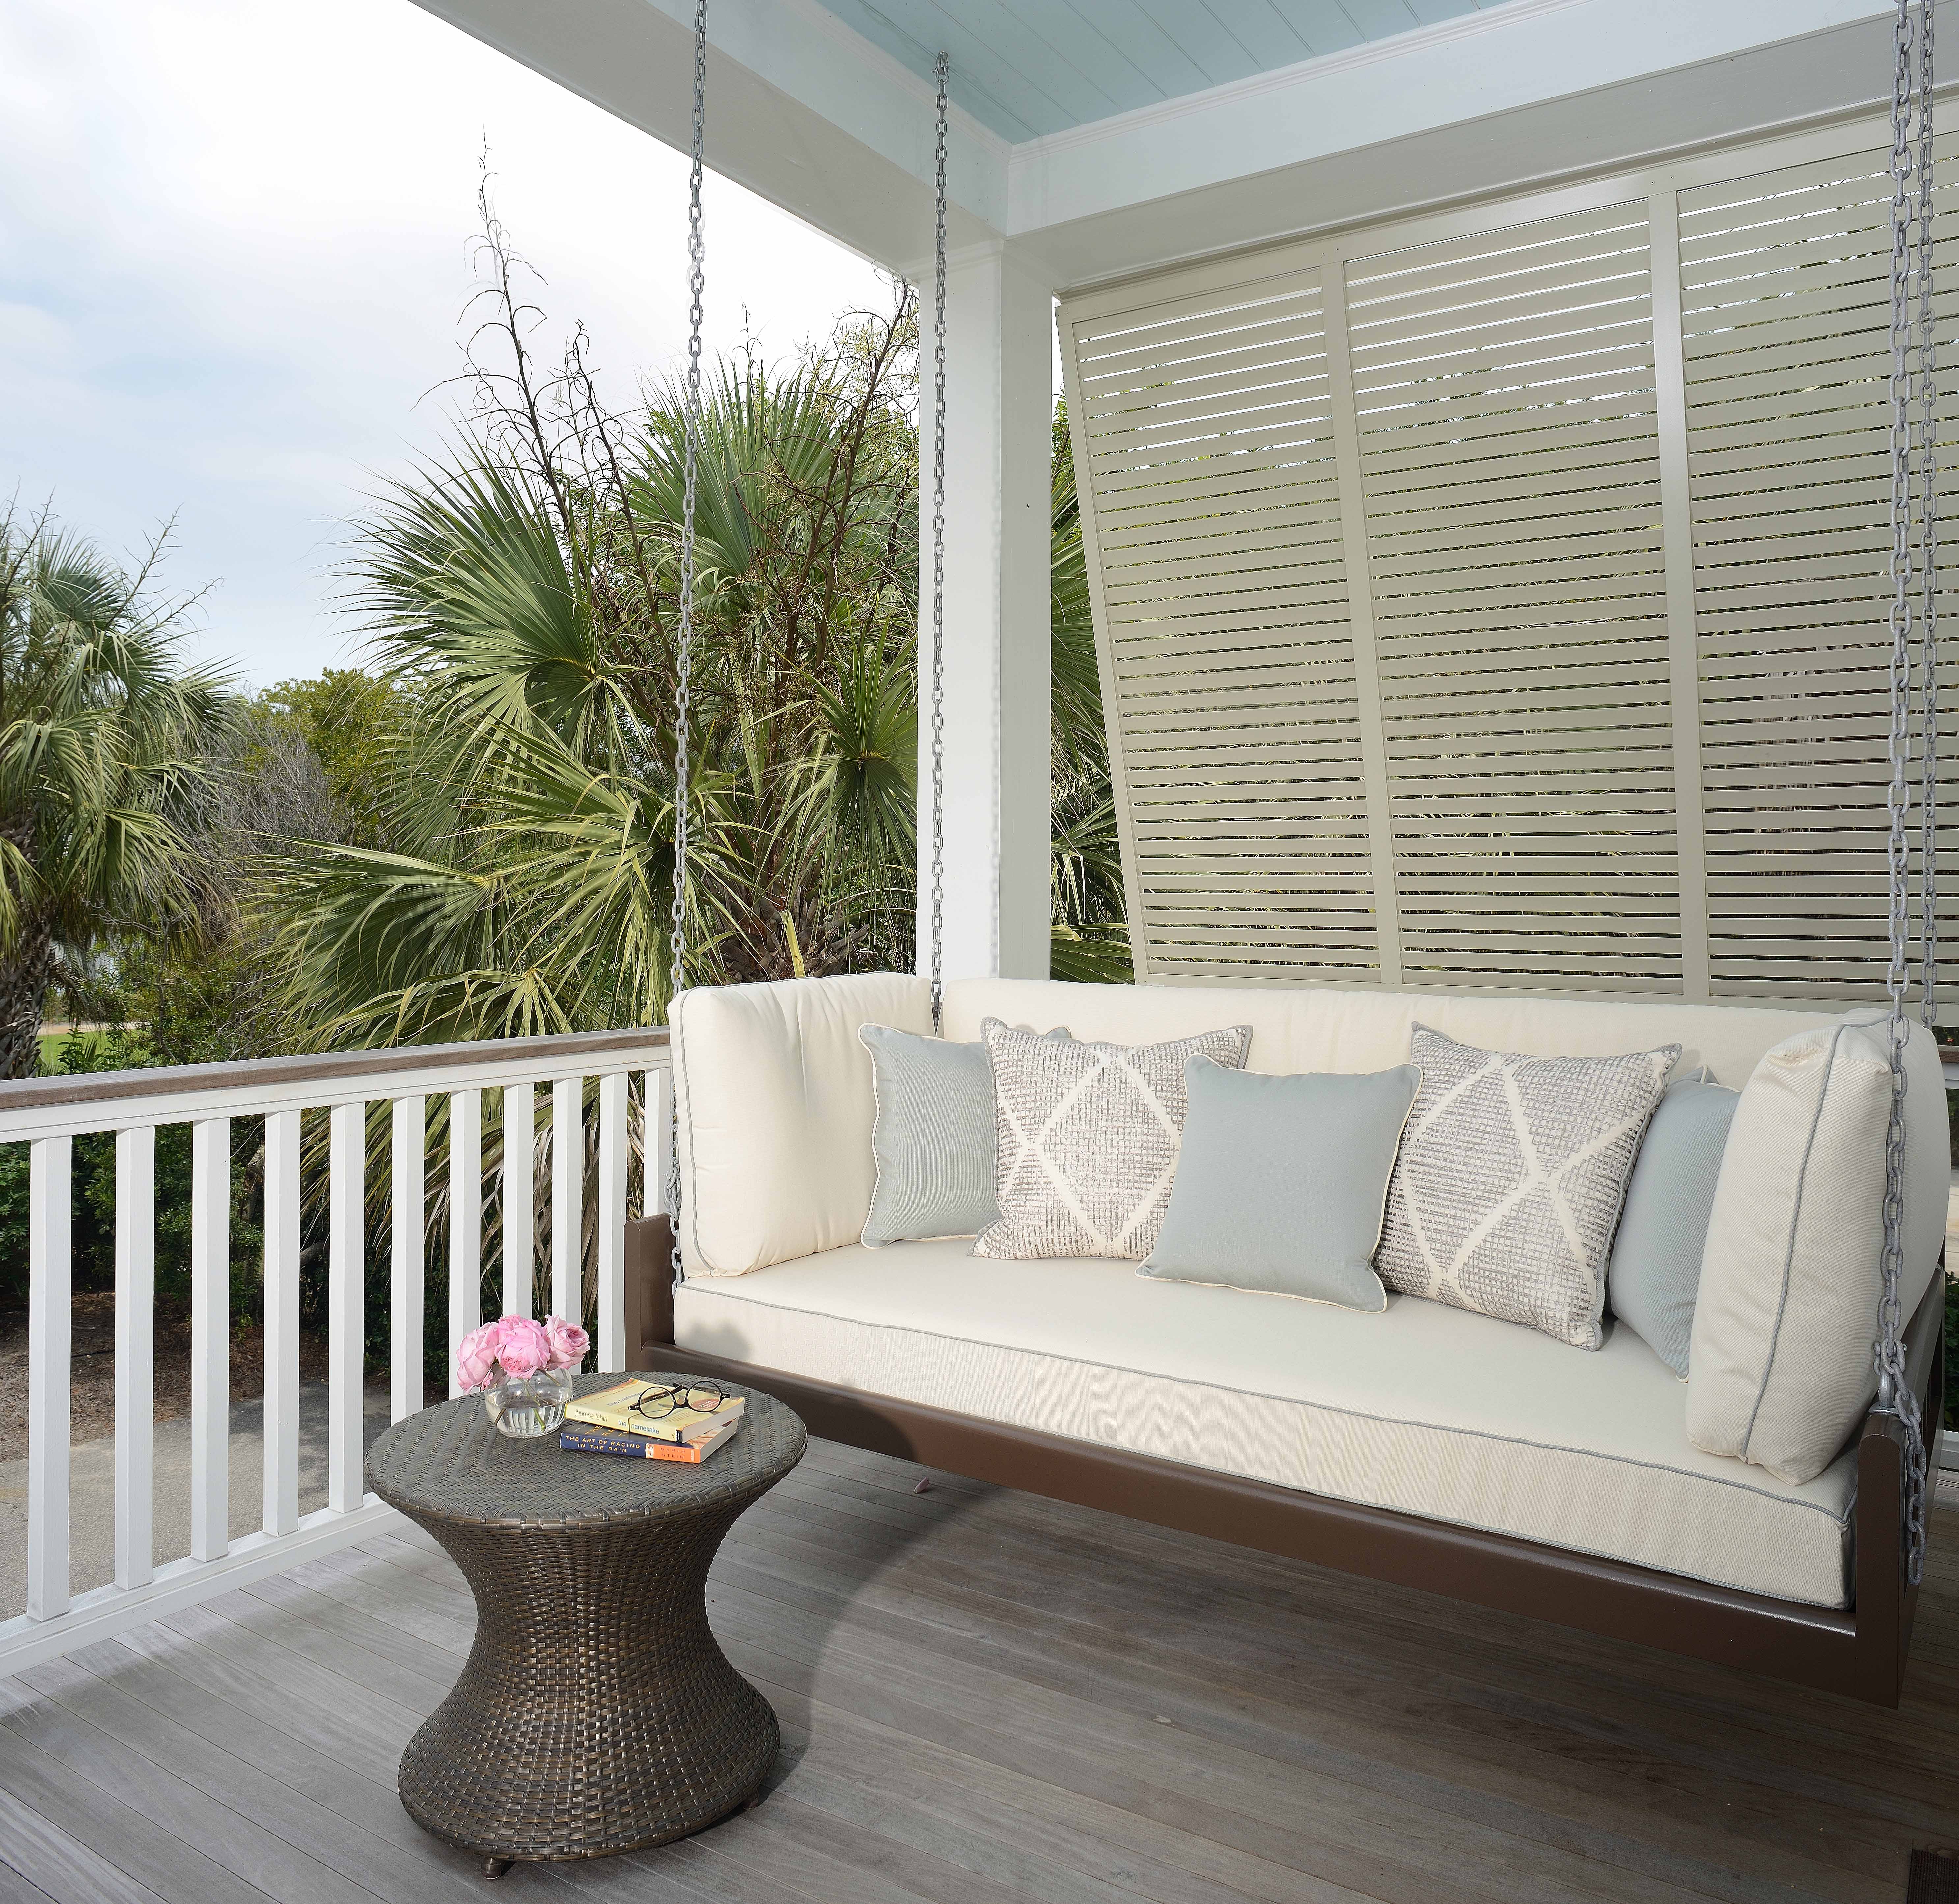 Living the Sullivan's Island dream, on this daybed